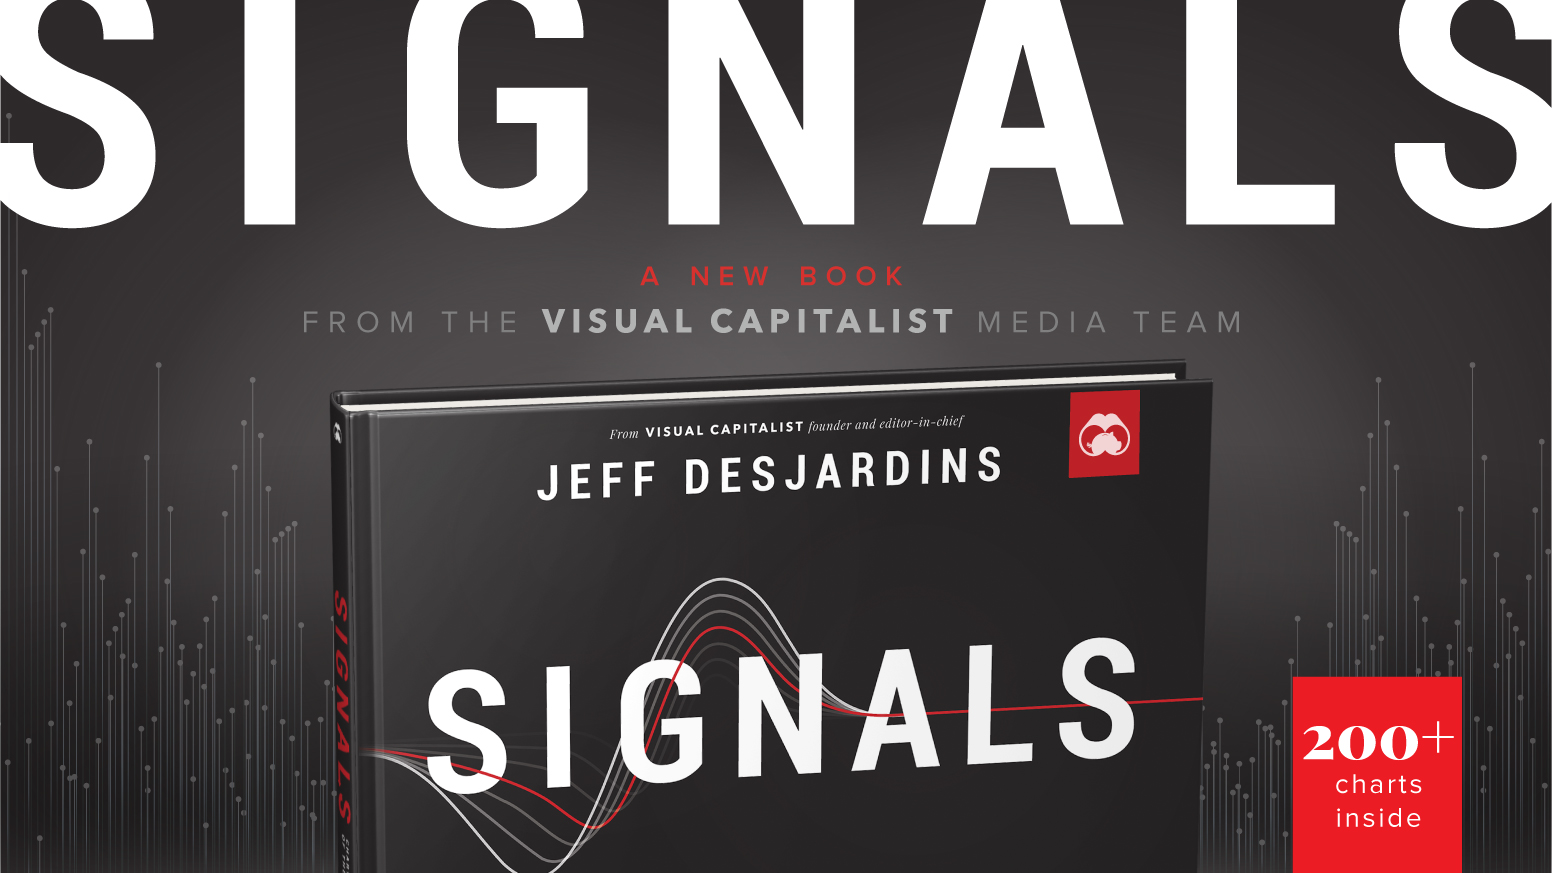 Introducing “Signals”, a New Book Concept from Visual Capitalist